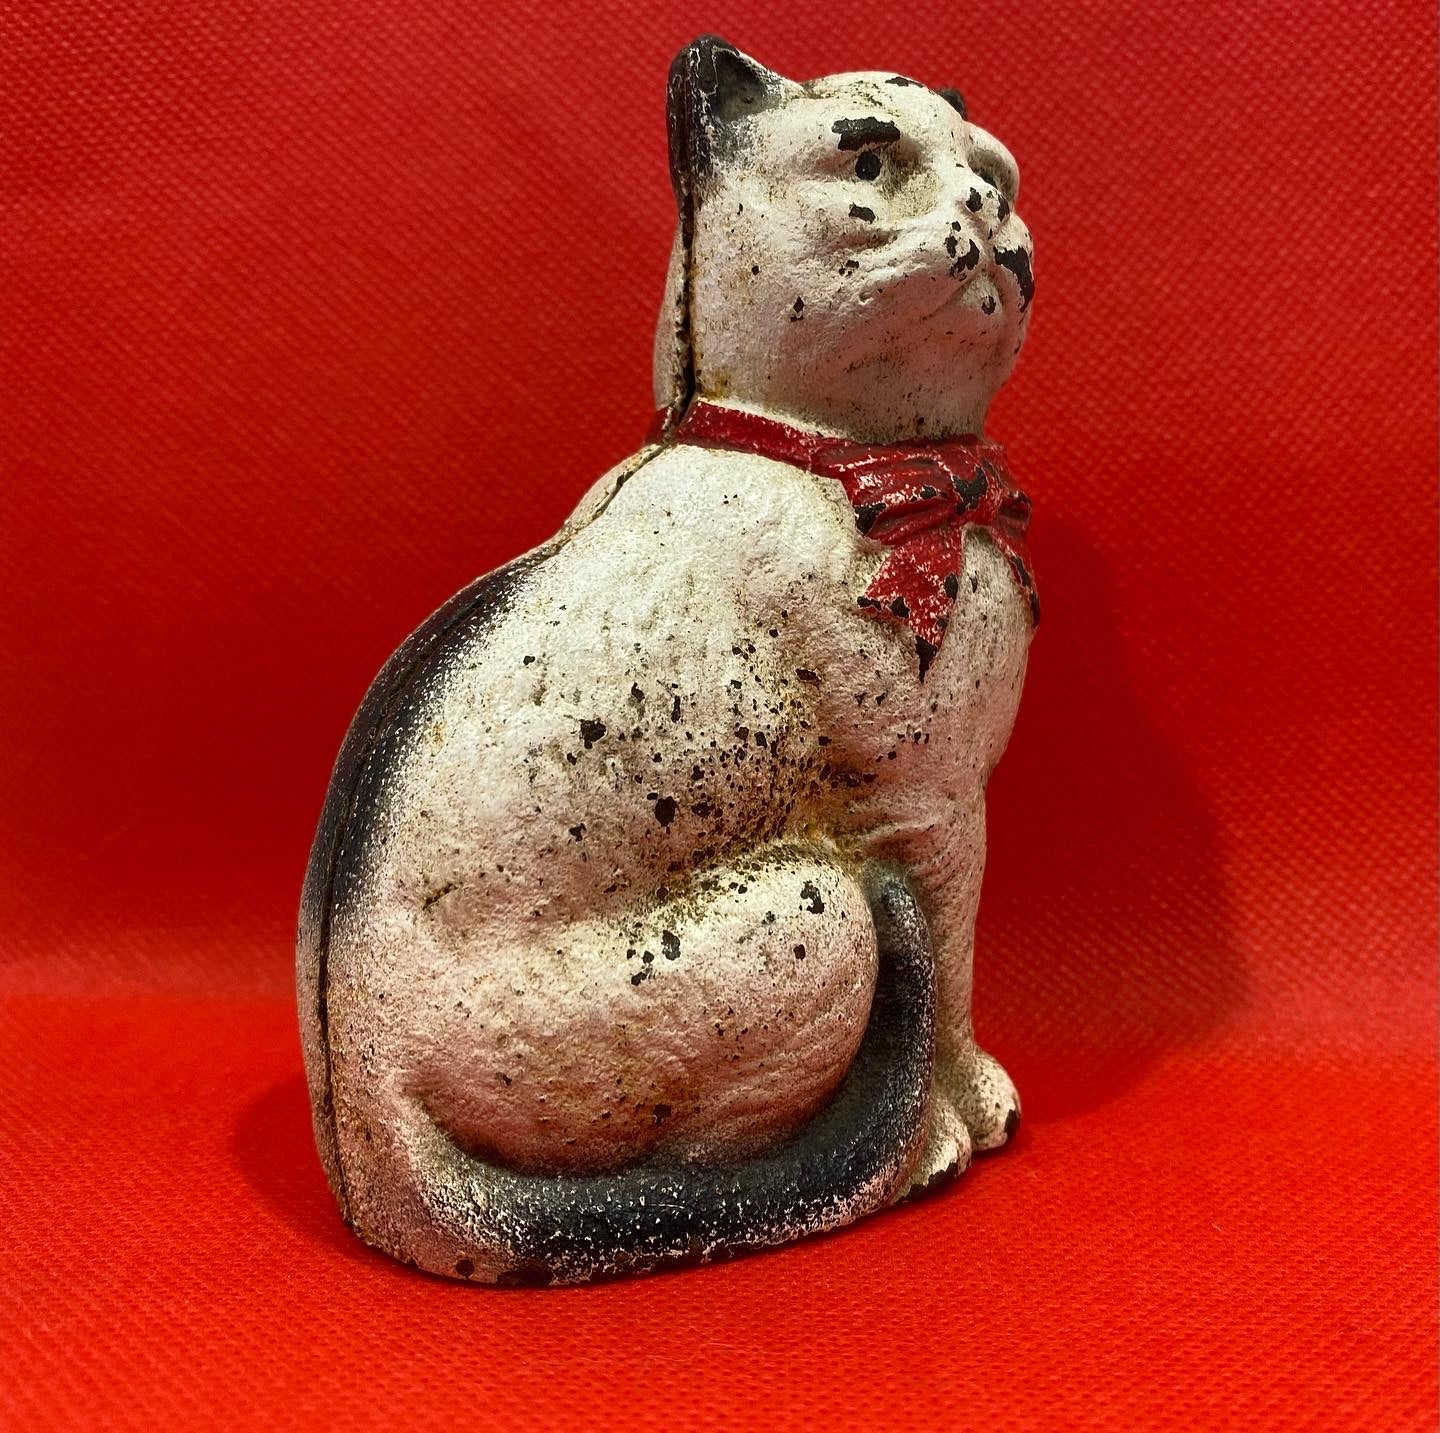 Antique, original, Cast Iron White Kat seated in profile coin bank, made by Hubley 1910s Very rare piece.